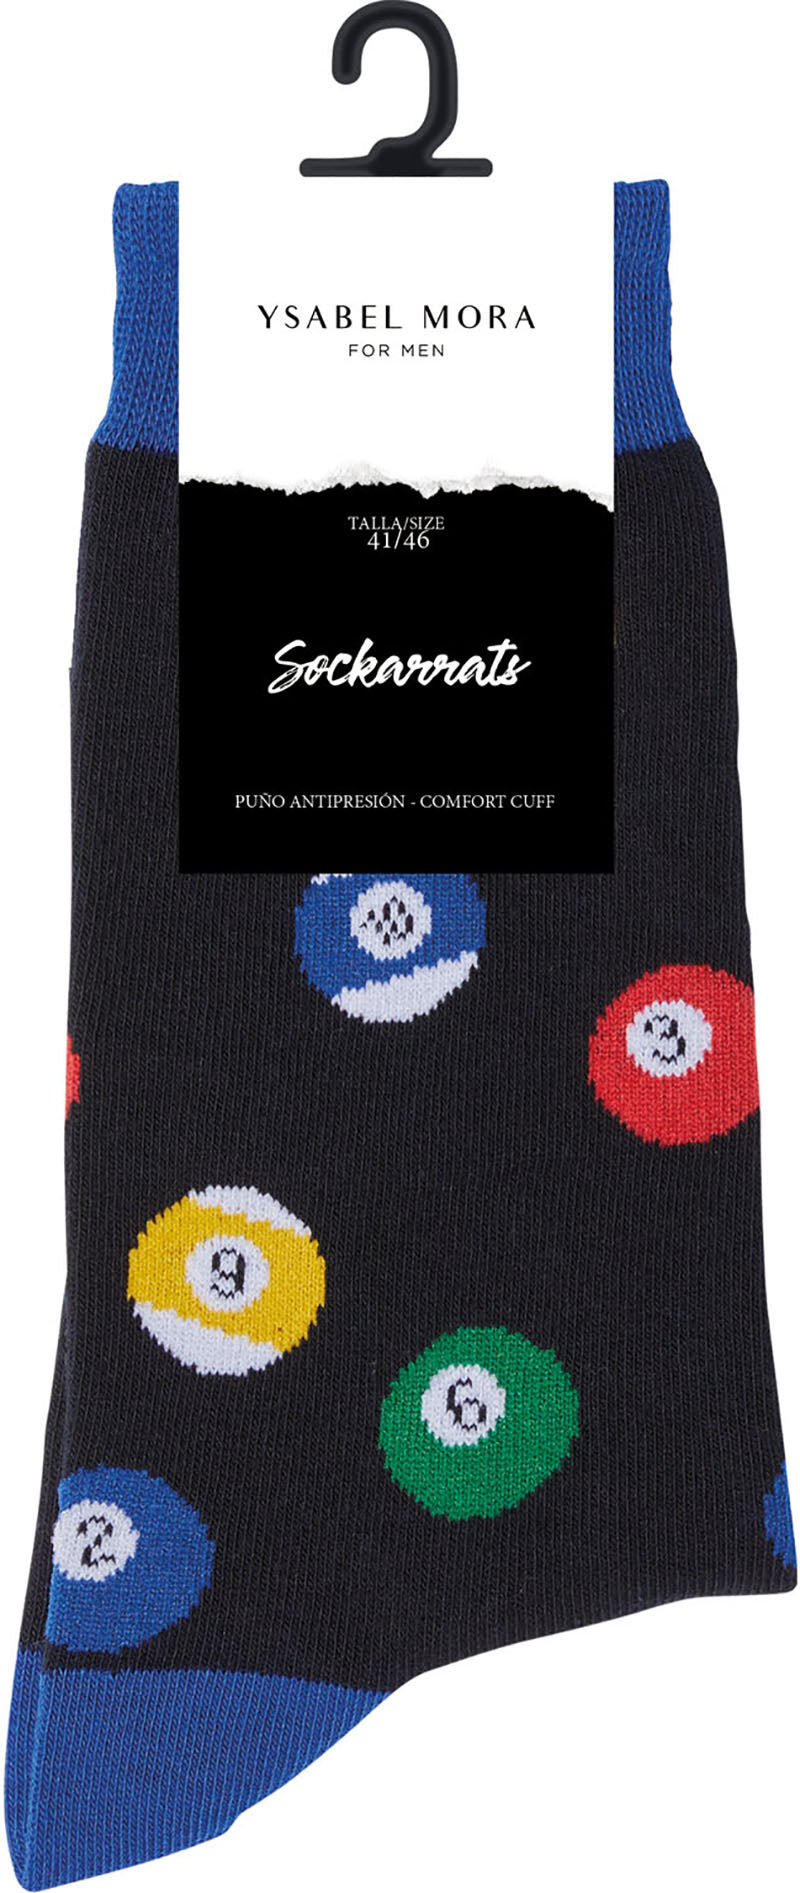 Ysabel Mora 22799 Pool Sock - Men's navy cotton ankle socks with an all over pool balls pattern in blue, red, green and yellow and blue and a red cuff, toe and heel.